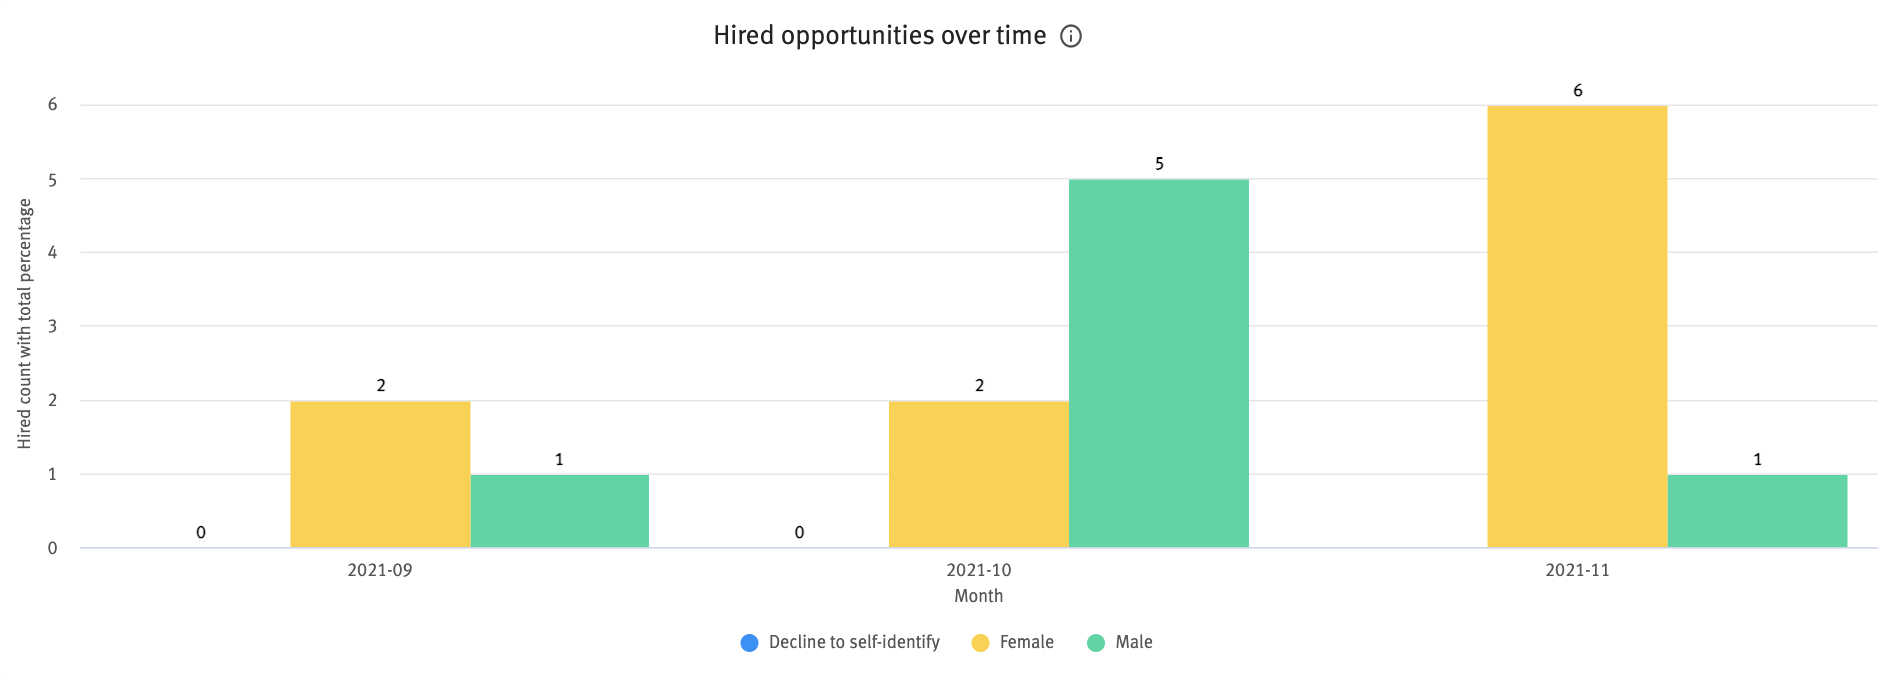 Hired opportunities over time chart